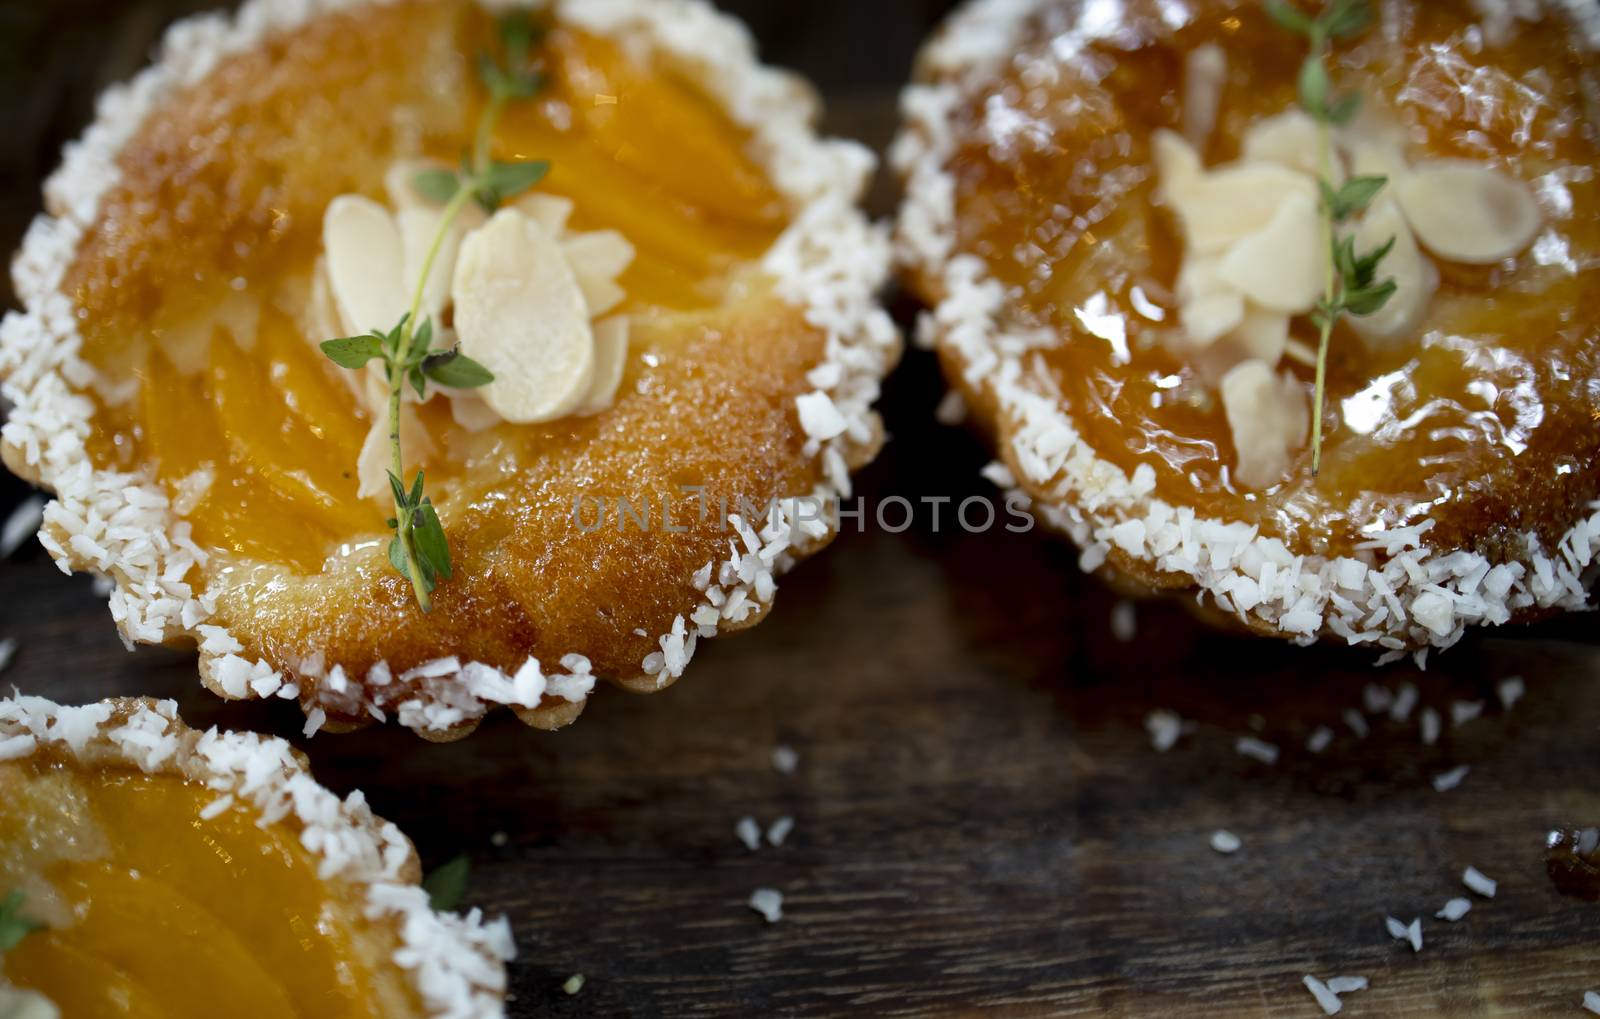 Peach tart with coconut and almond by Nawoot